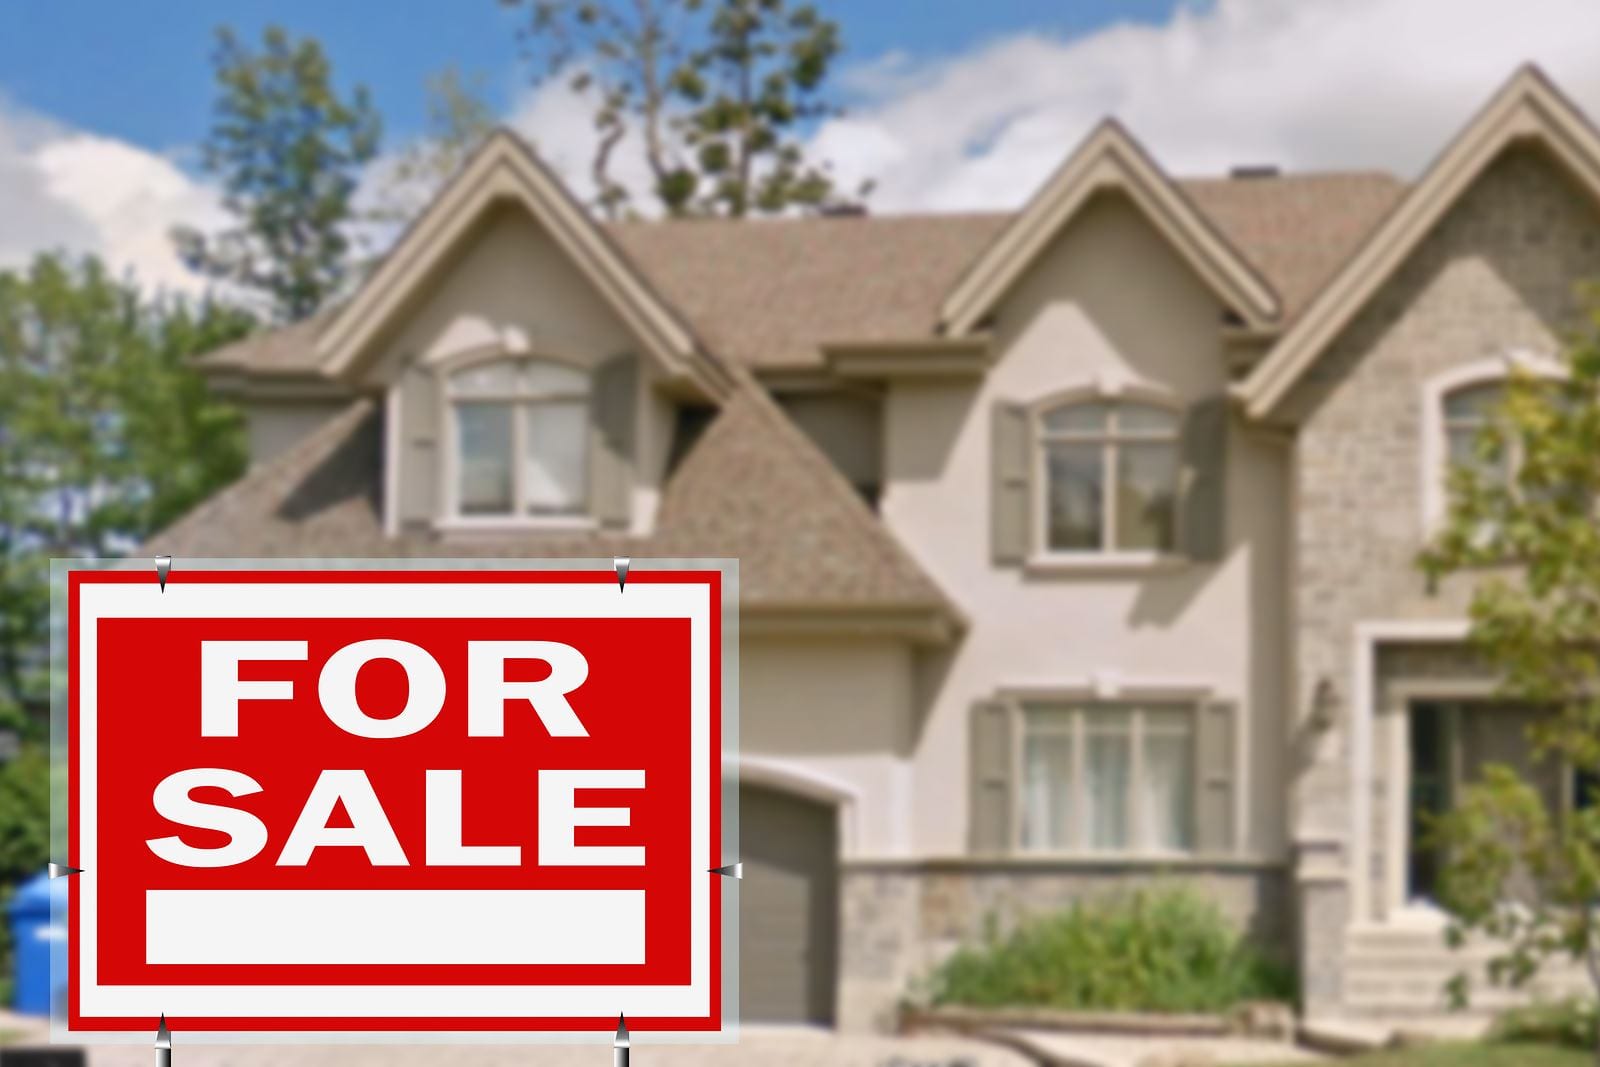 Buying a House For Sale by Owner: 6 Tips - Mashvisor